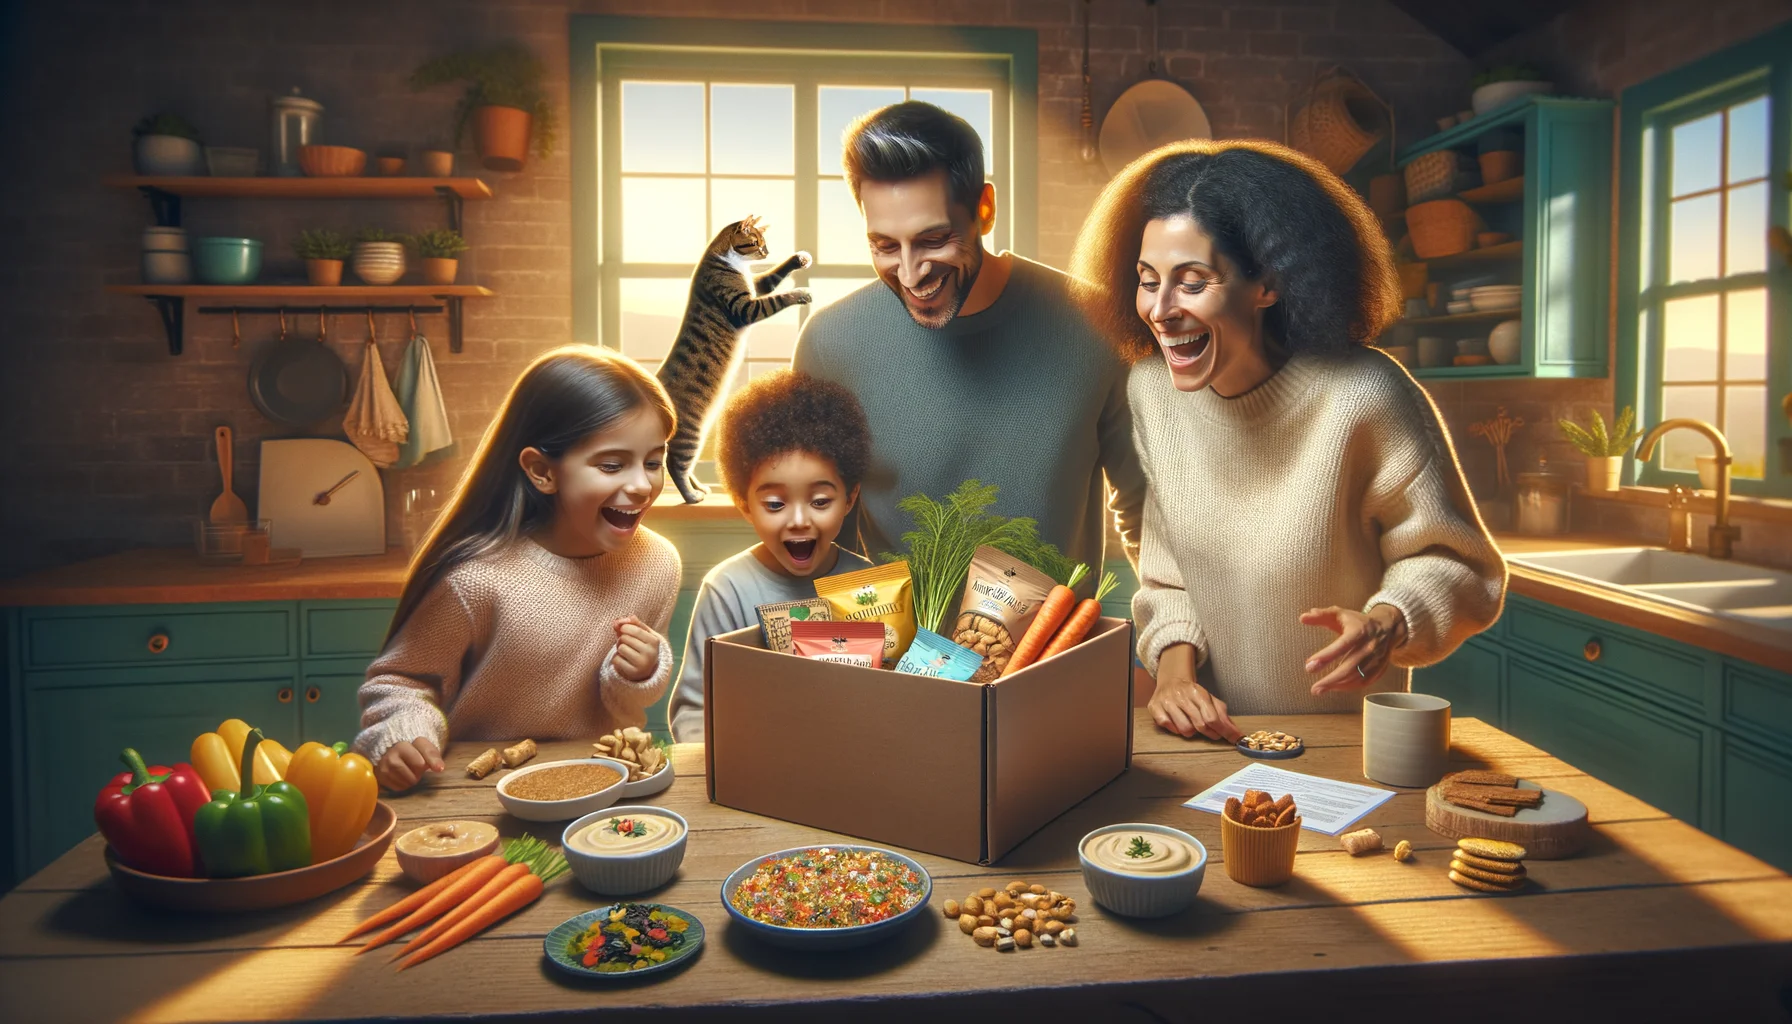 Imagine a brilliantly colored and vivid scene of a family in their cozy, light-filled kitchen. The mom, who is of Hispanic descent, and dad, who is of Caucasian descent, are excitedly unboxing a new 'Healthy Snack Box Subscription', their eyes lit with anticipation. Their two kids, a Middle-Eastern descent girl and a Black descent boy are eager to uncover the contents. The box reveals an array of vibrant, healthy snacks such as miniature carrots, hummus dip, toasted seaweed, whole grain crackers, and a mix of nuts. The cat has gotten into the scene, comically batting a loose mini-carrot off the table. The scene radiates warmth, bonding, and is infused with a good dose of humor.